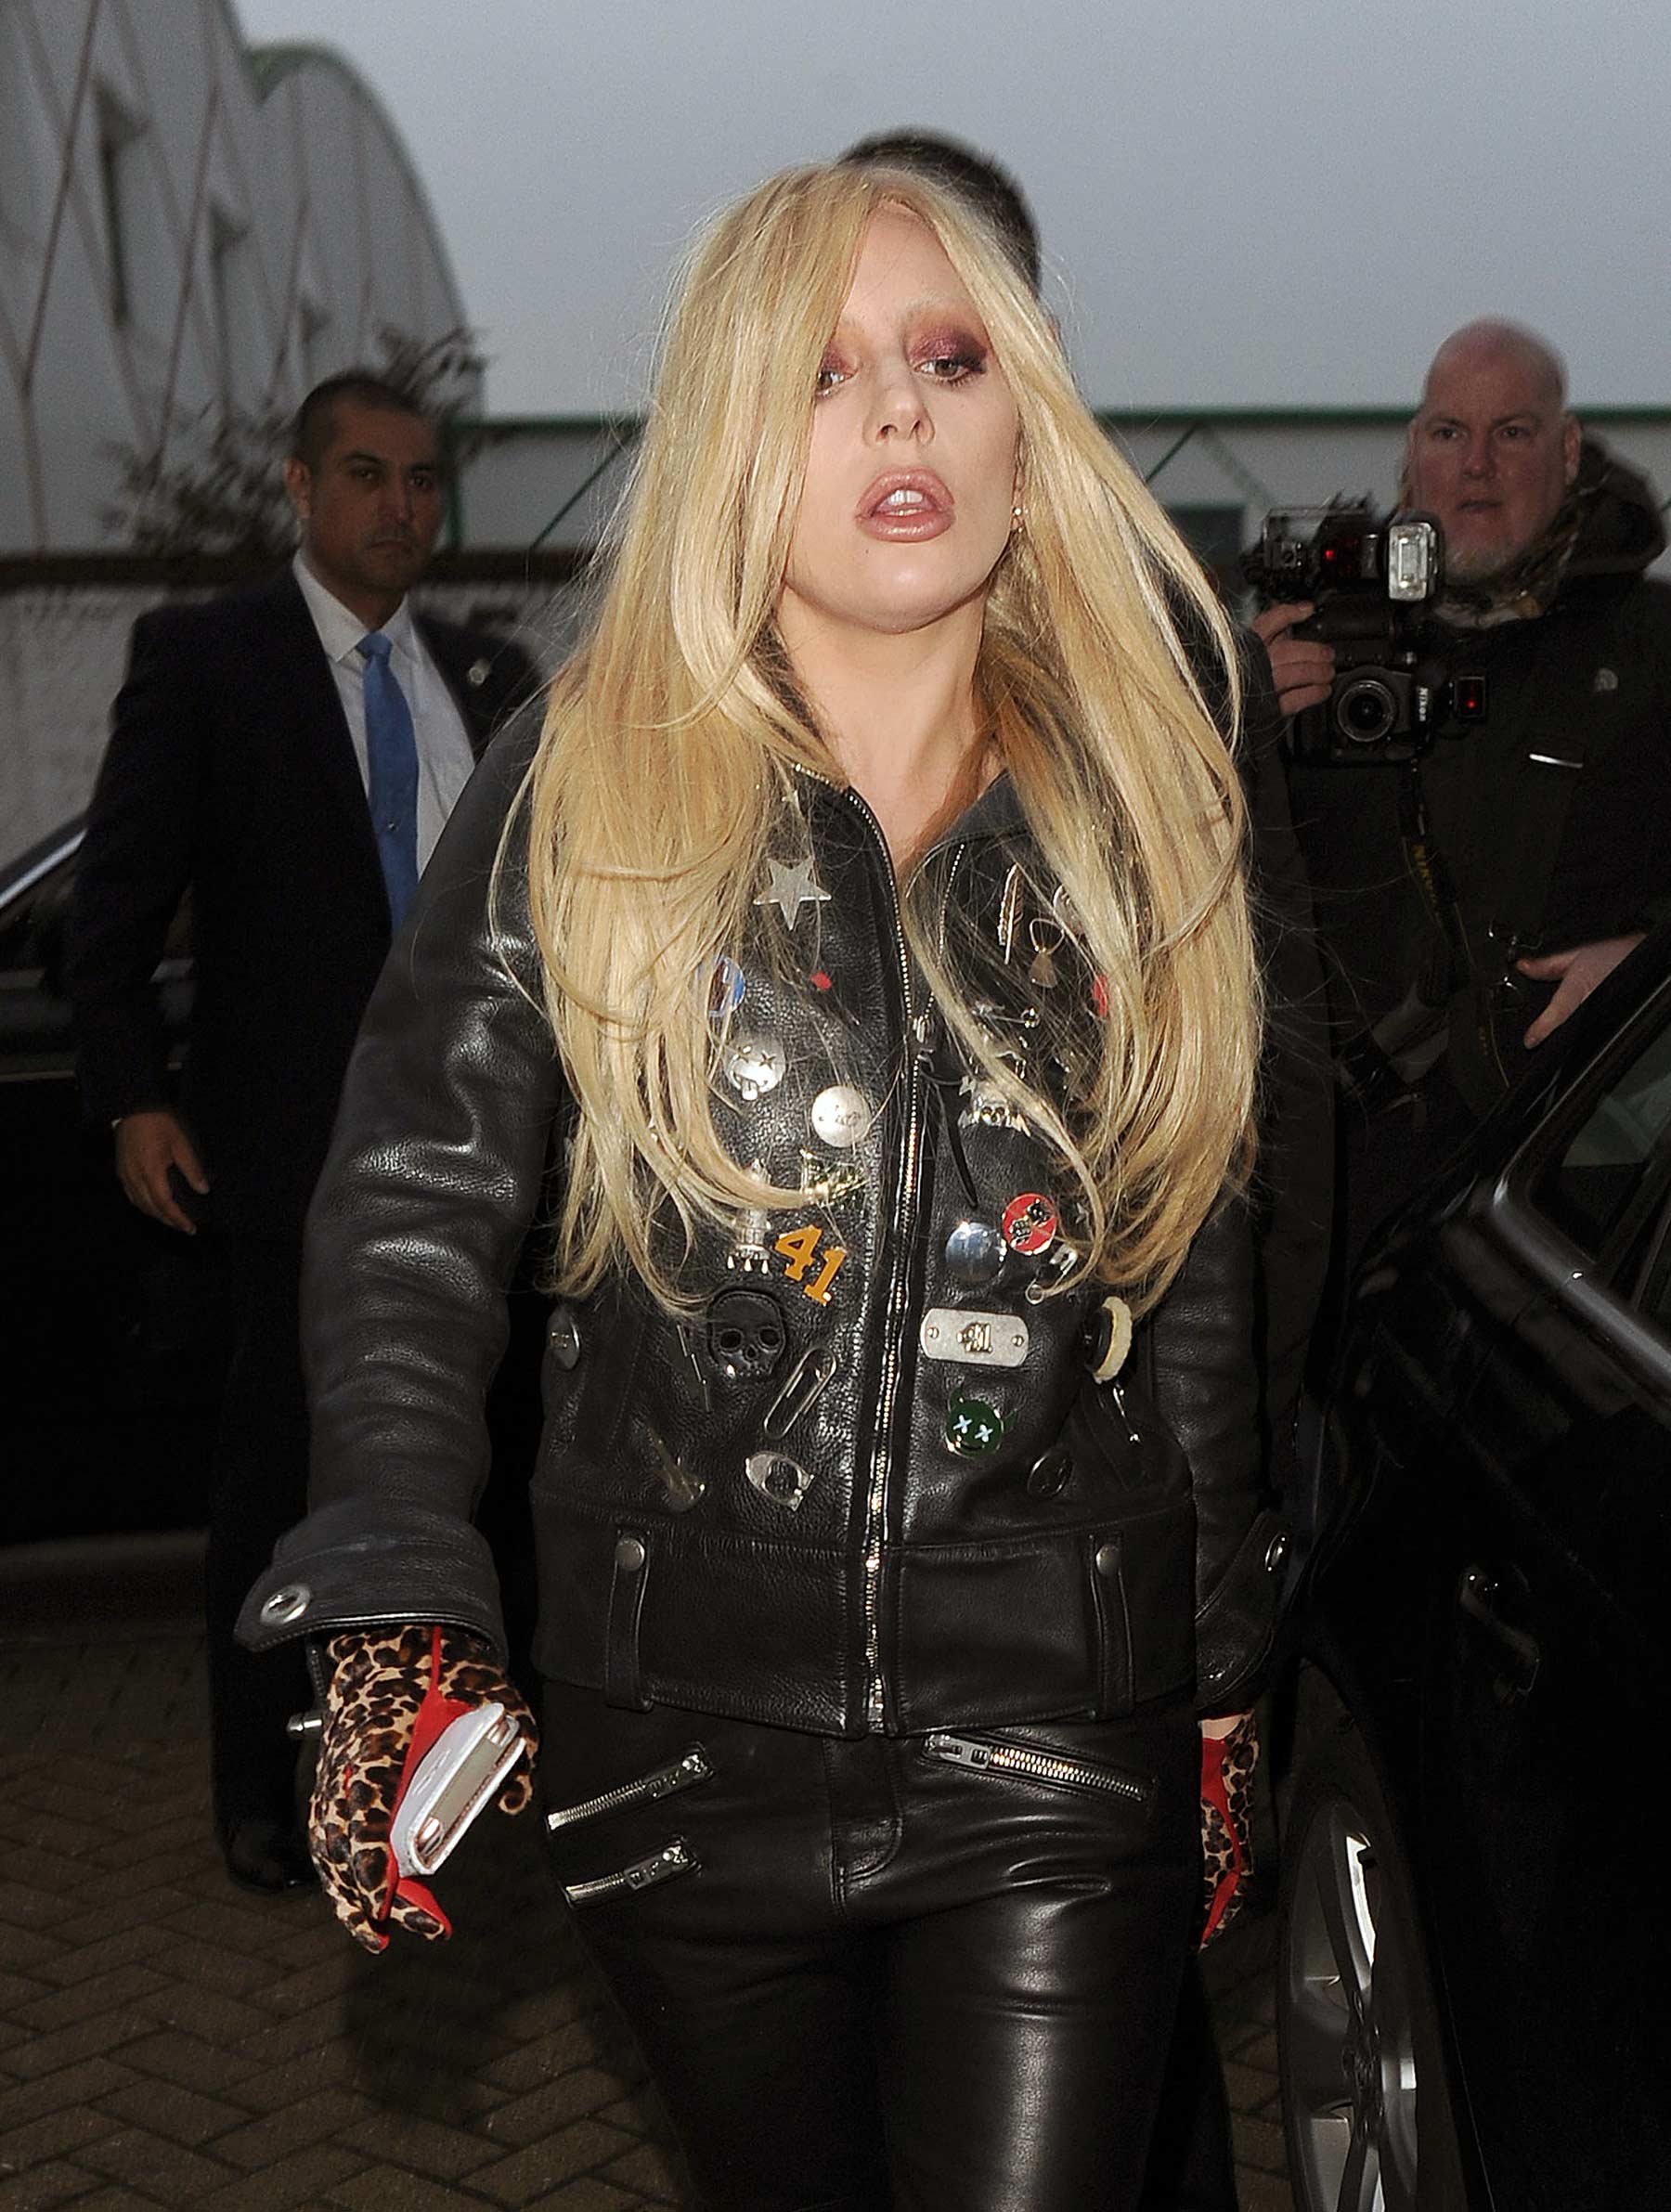 Lady Gaga out and about in London